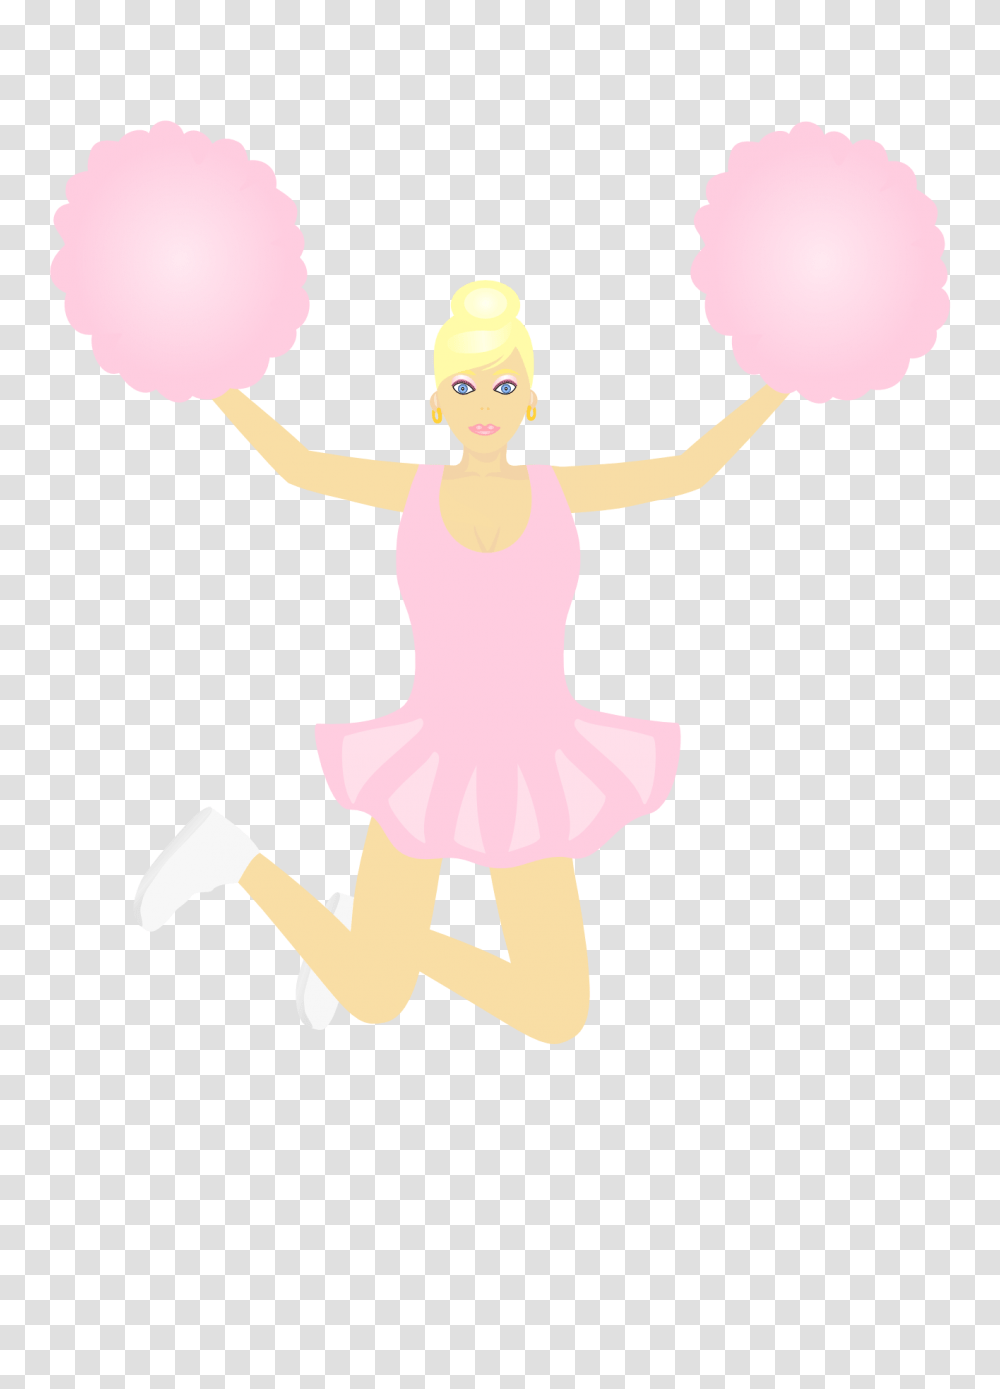 Cheer Toe Touch Clip Art Viewing Image For Cheer Toe Touch, Person, Human, Dance, Ballet Transparent Png